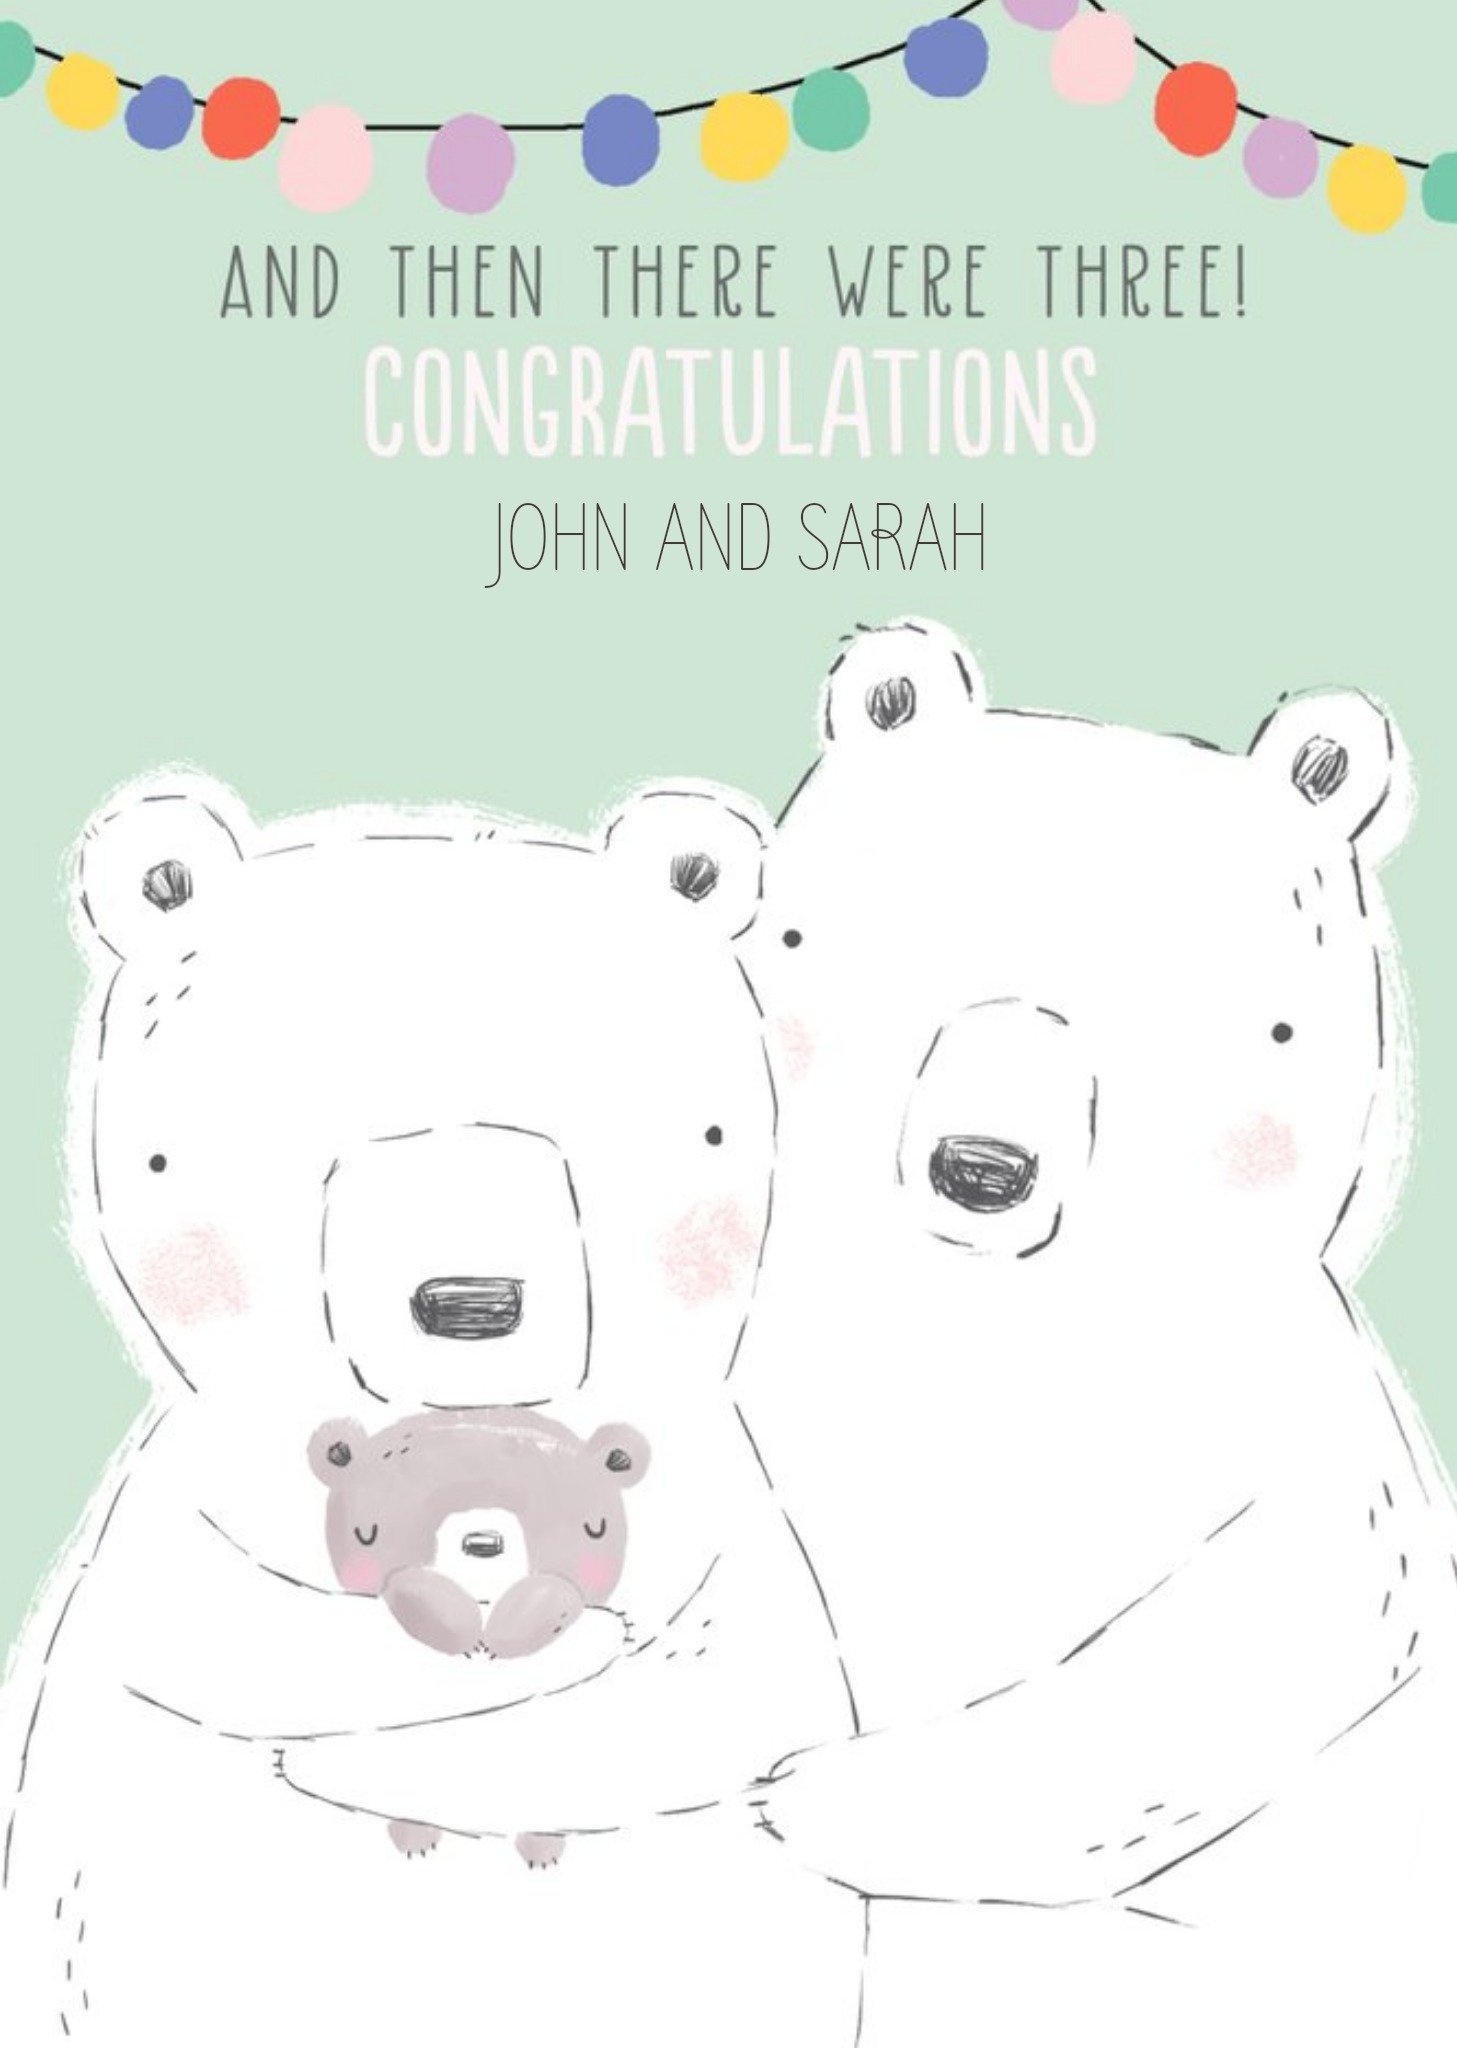 Moonpig Cute Illustrative Then There Were Three New Baby Card Ecard